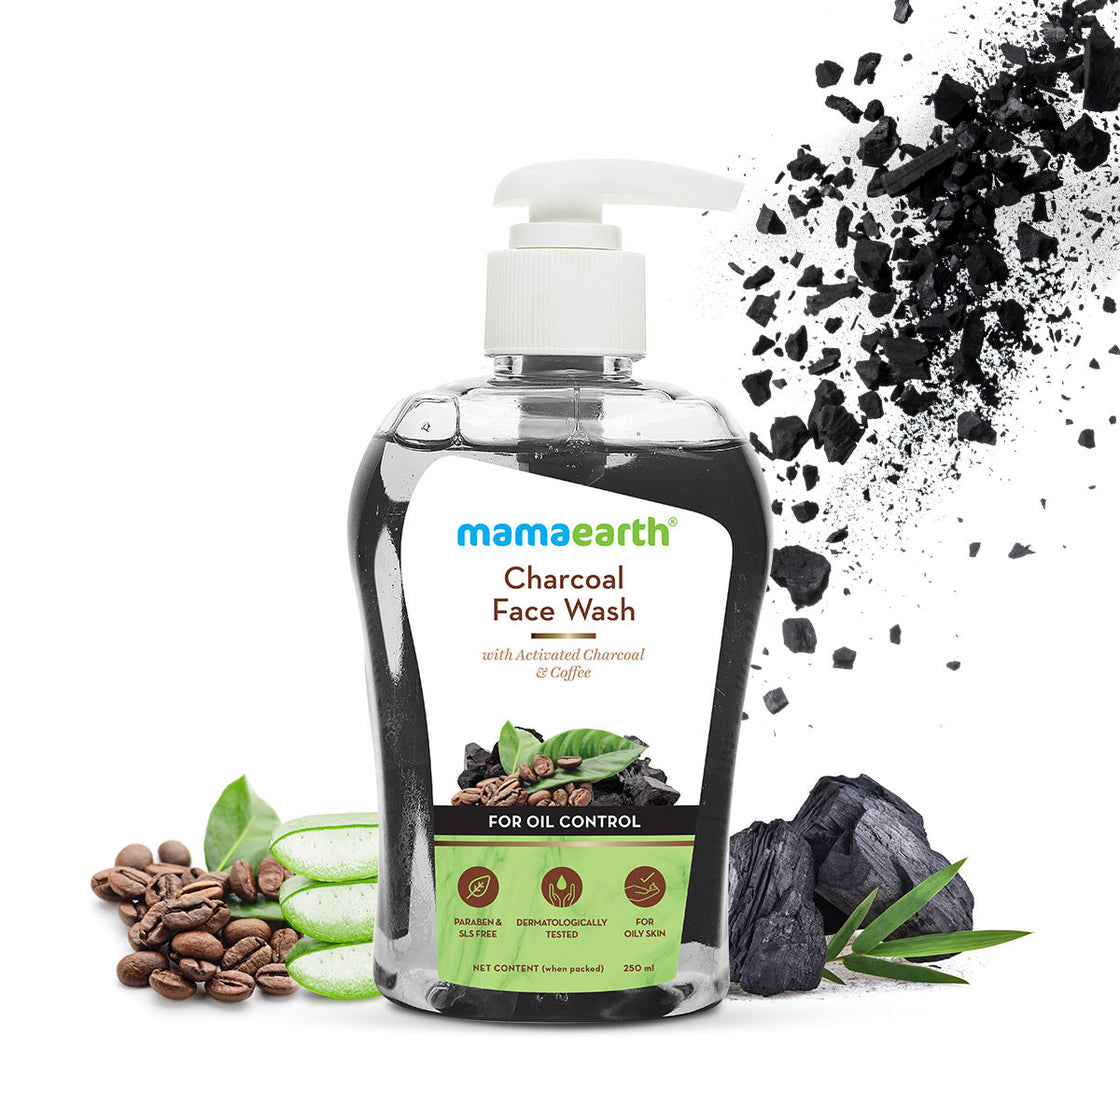 Mamaearth Charcoal Face Wash With Activated Charcoal And Coffee For Oil Control